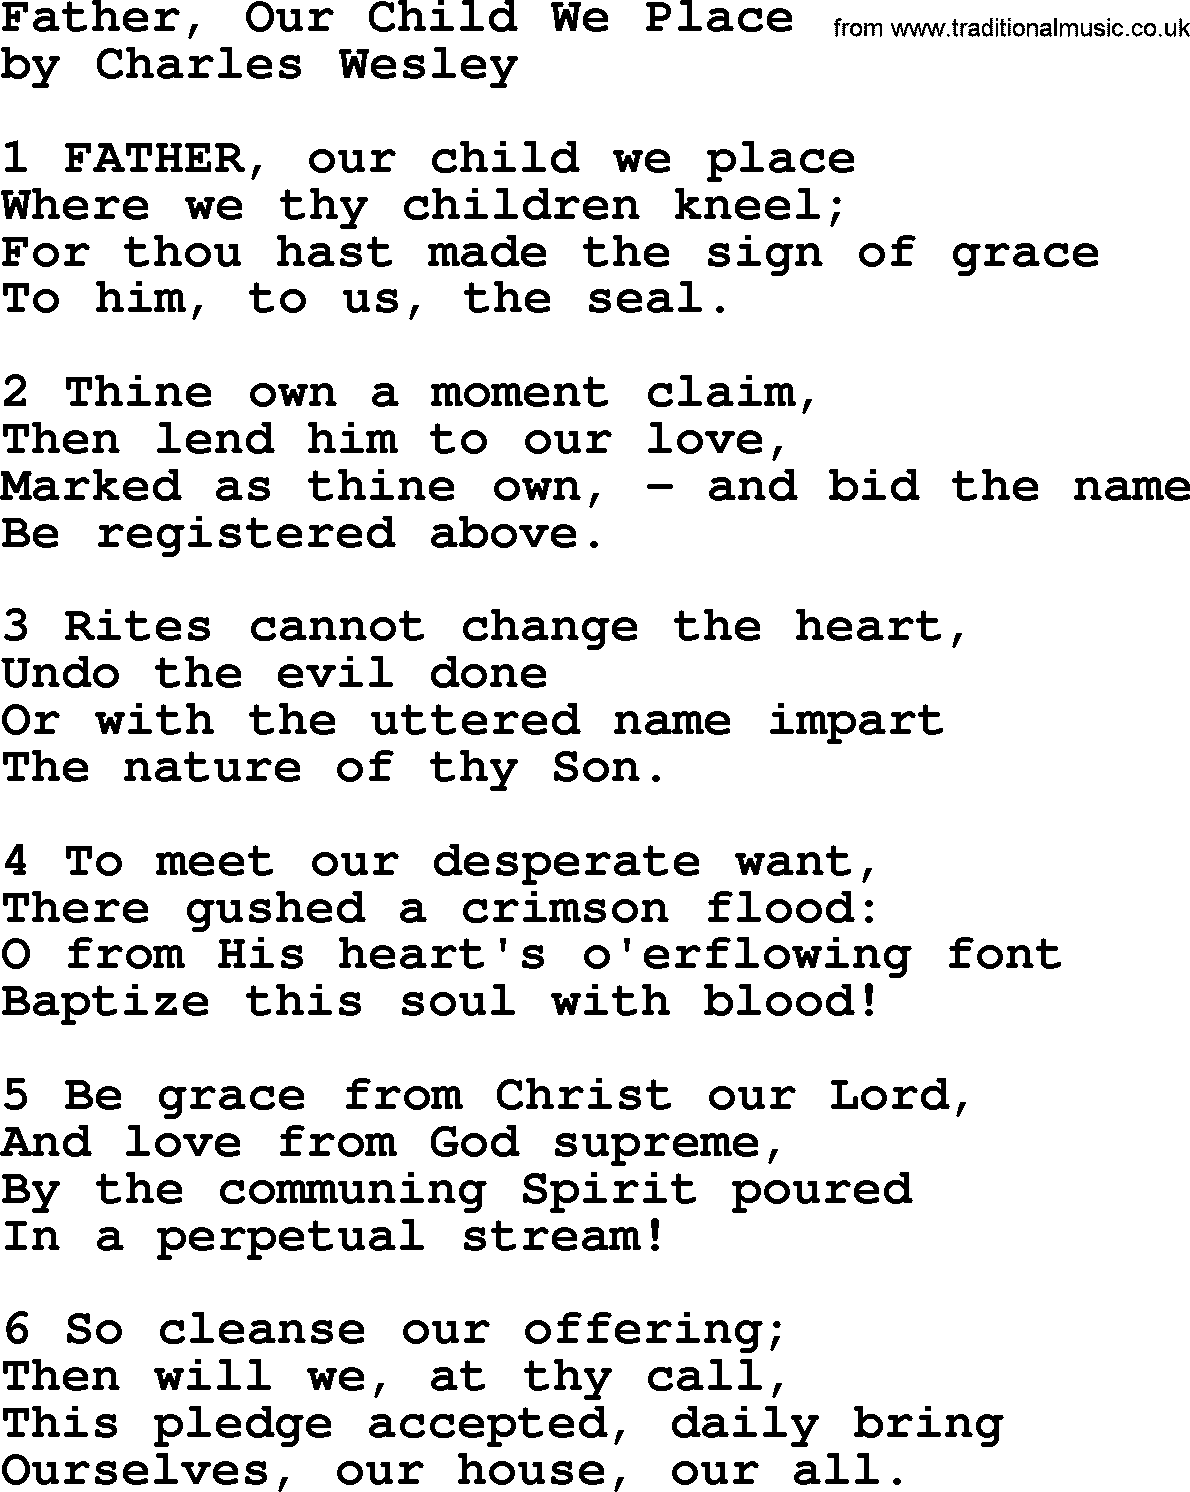 Charles Wesley hymn: Father, Our Child We Place, lyrics